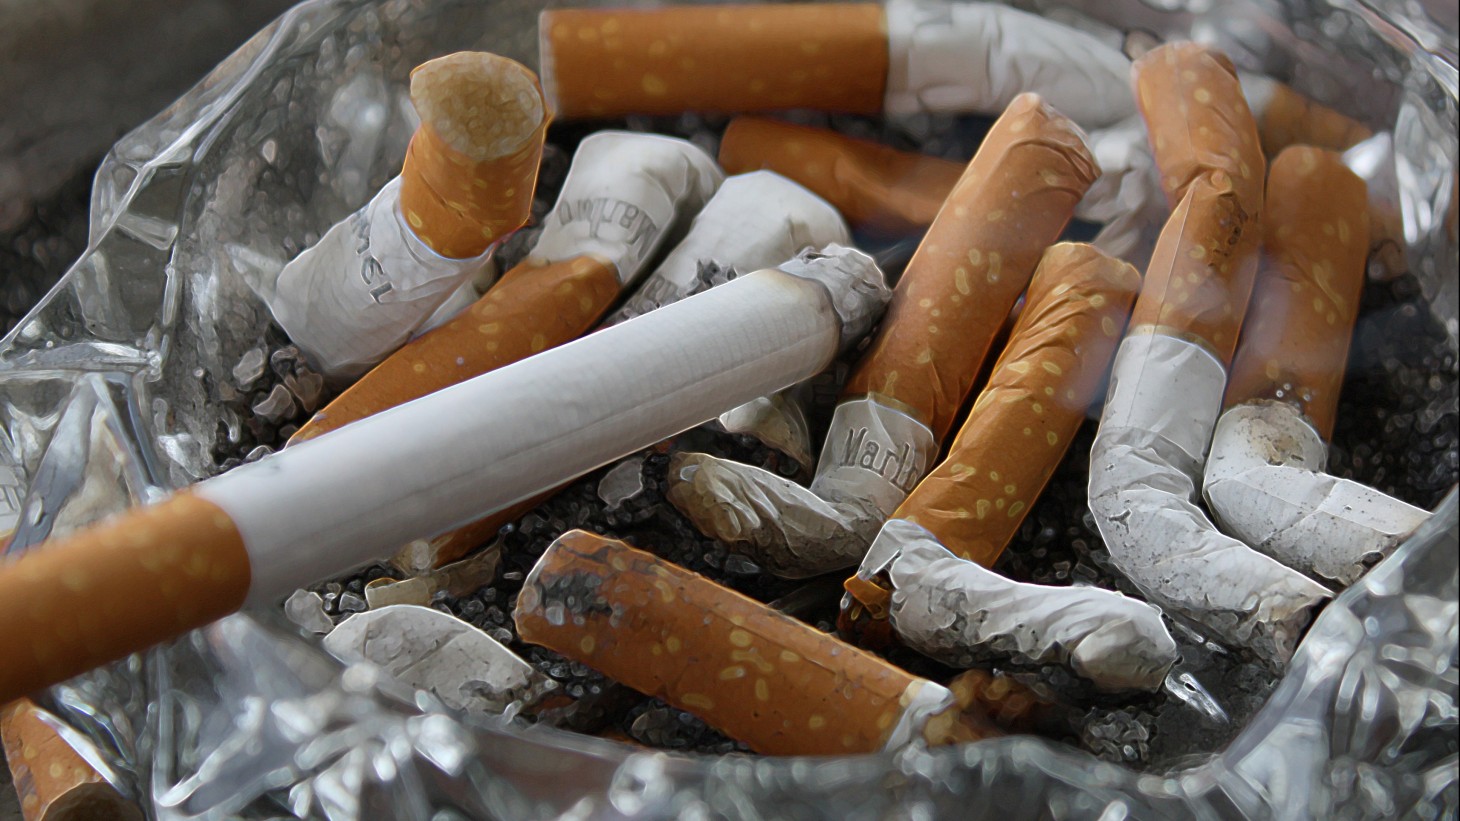 A bunch of cigarette butts in an ashtray 